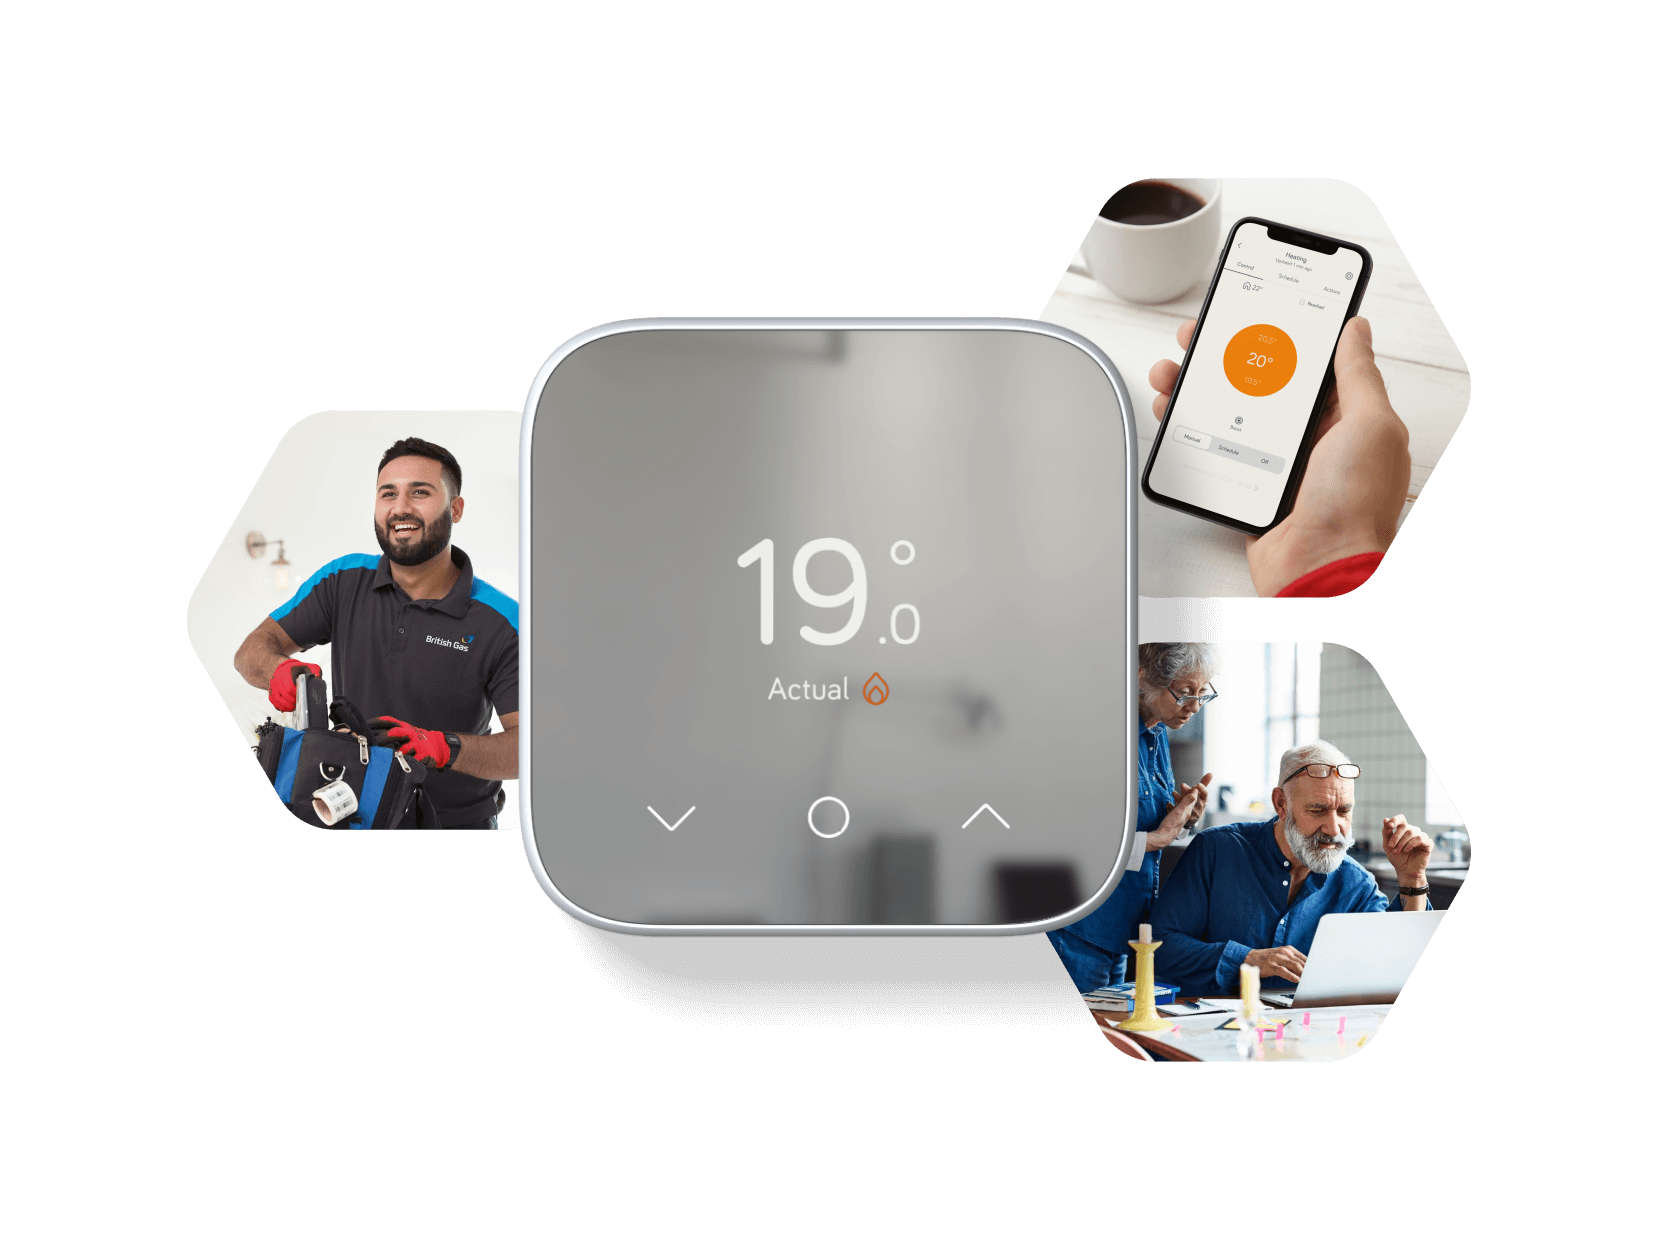 A Hive Thermostat Mini, alongside Hive customers, the Hive App on a smartphone, and a British Gas engineer.